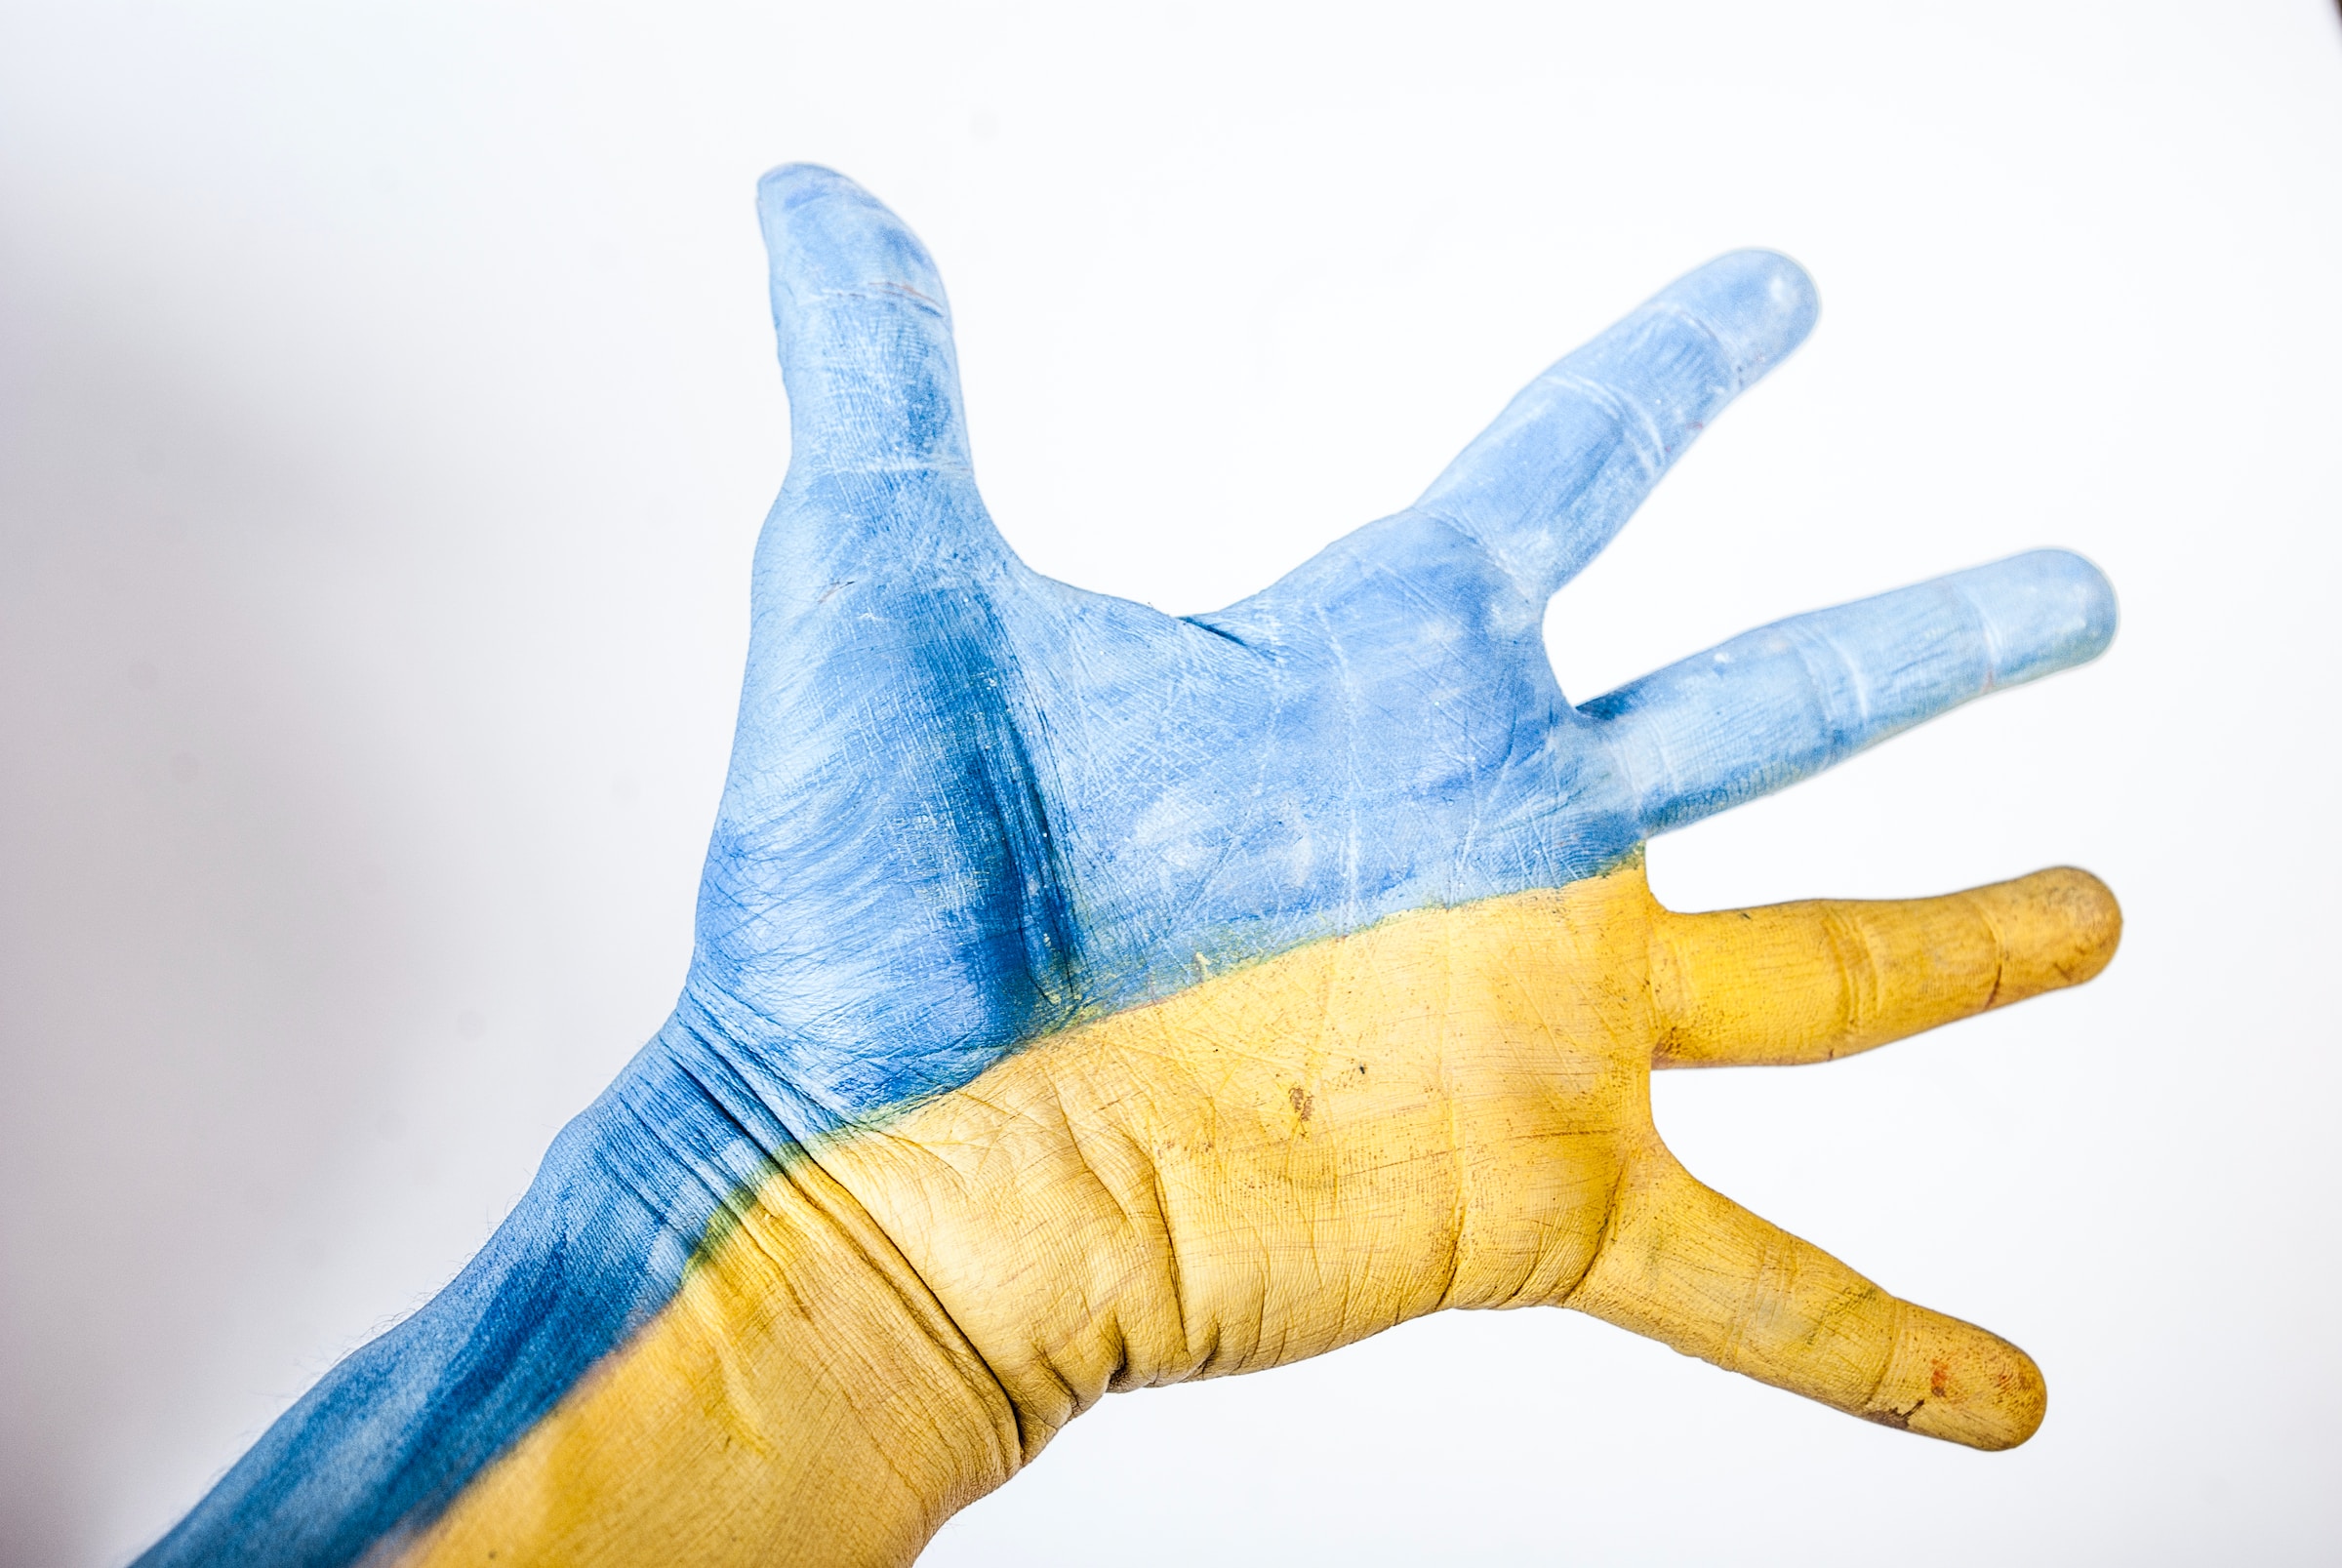 Open hand reaching - painted blue and yellow